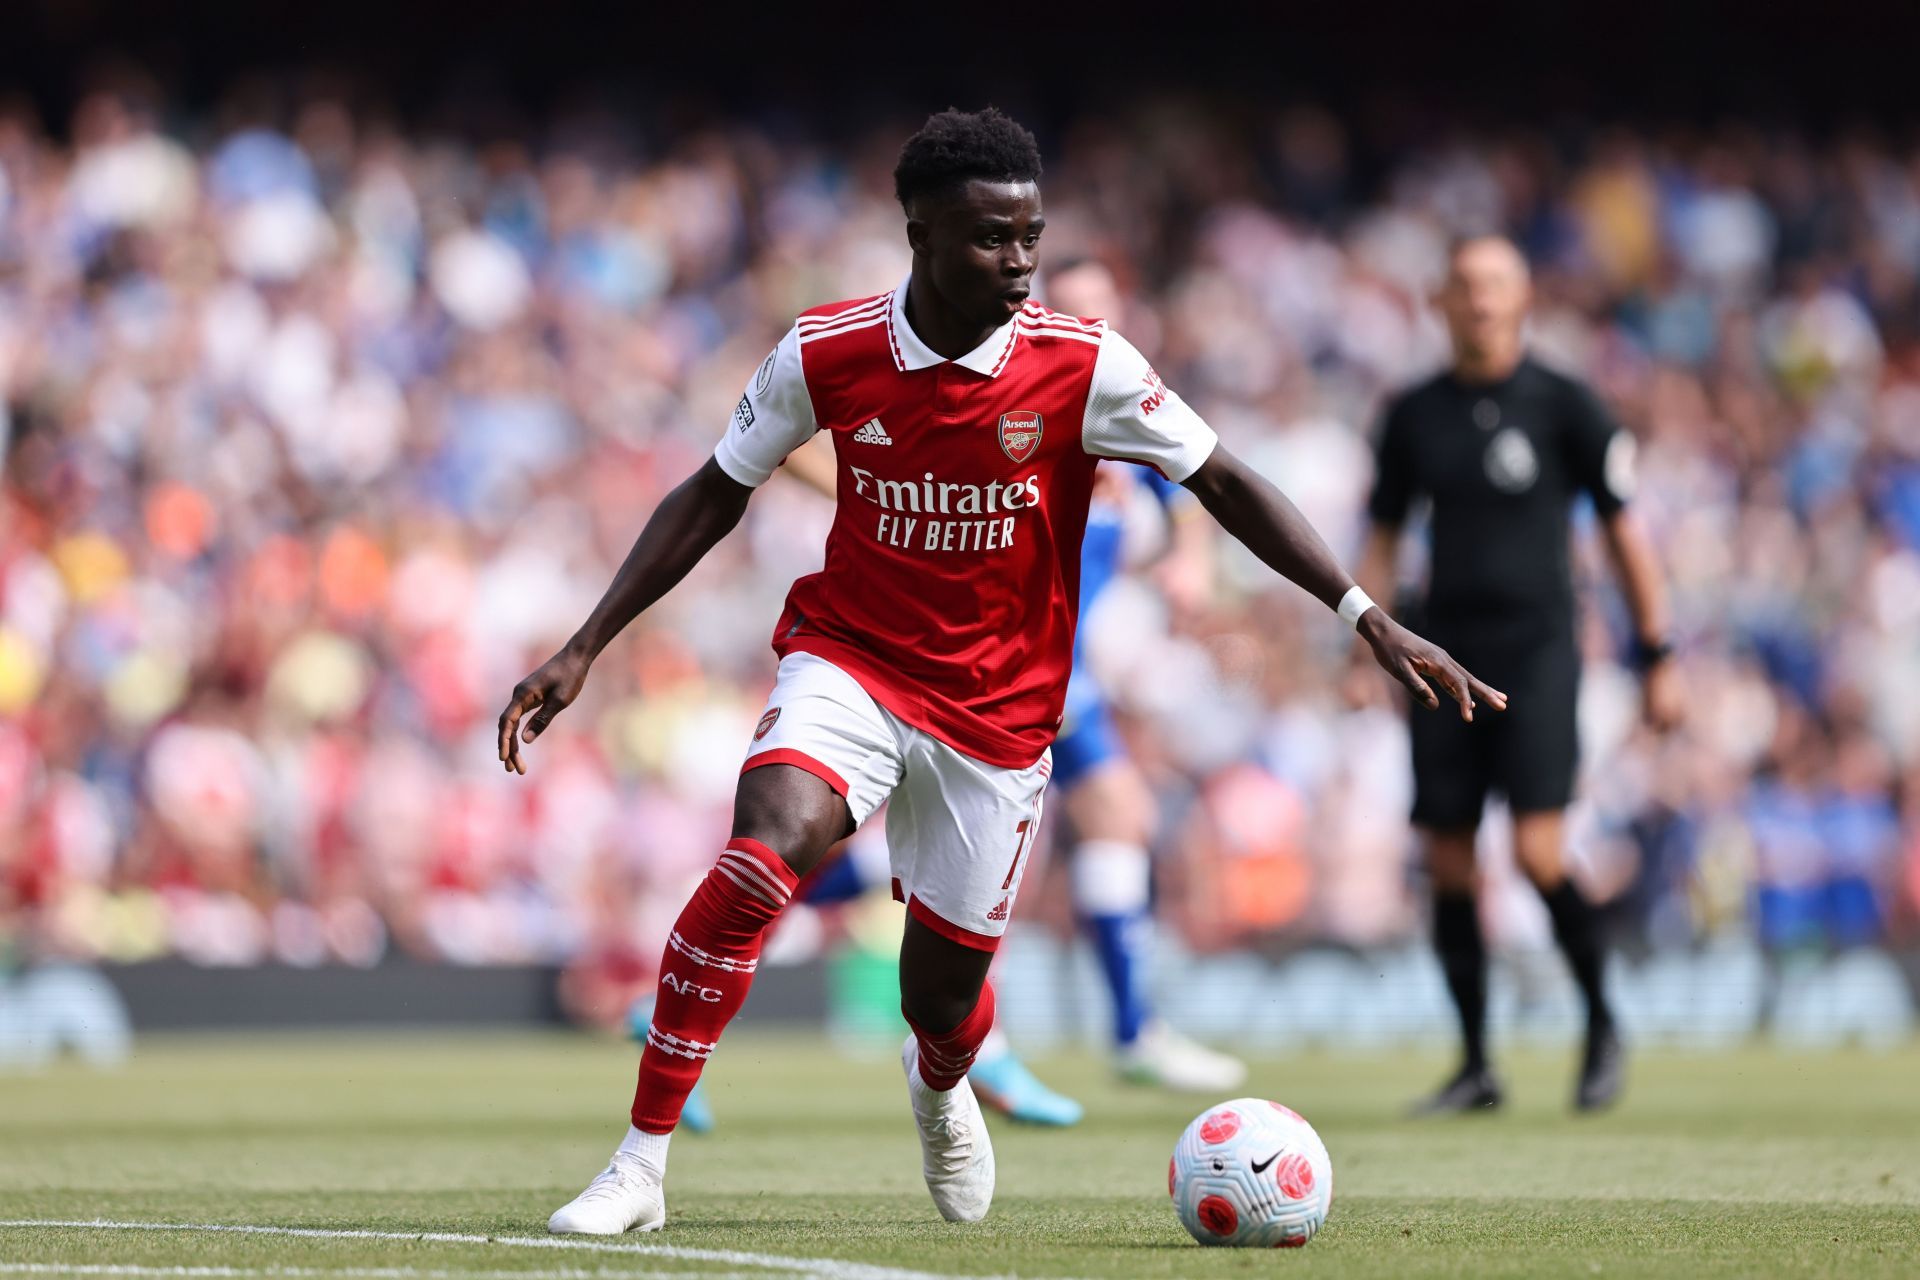 Bukayo Saka is tipped to have a great future at the Emirates.